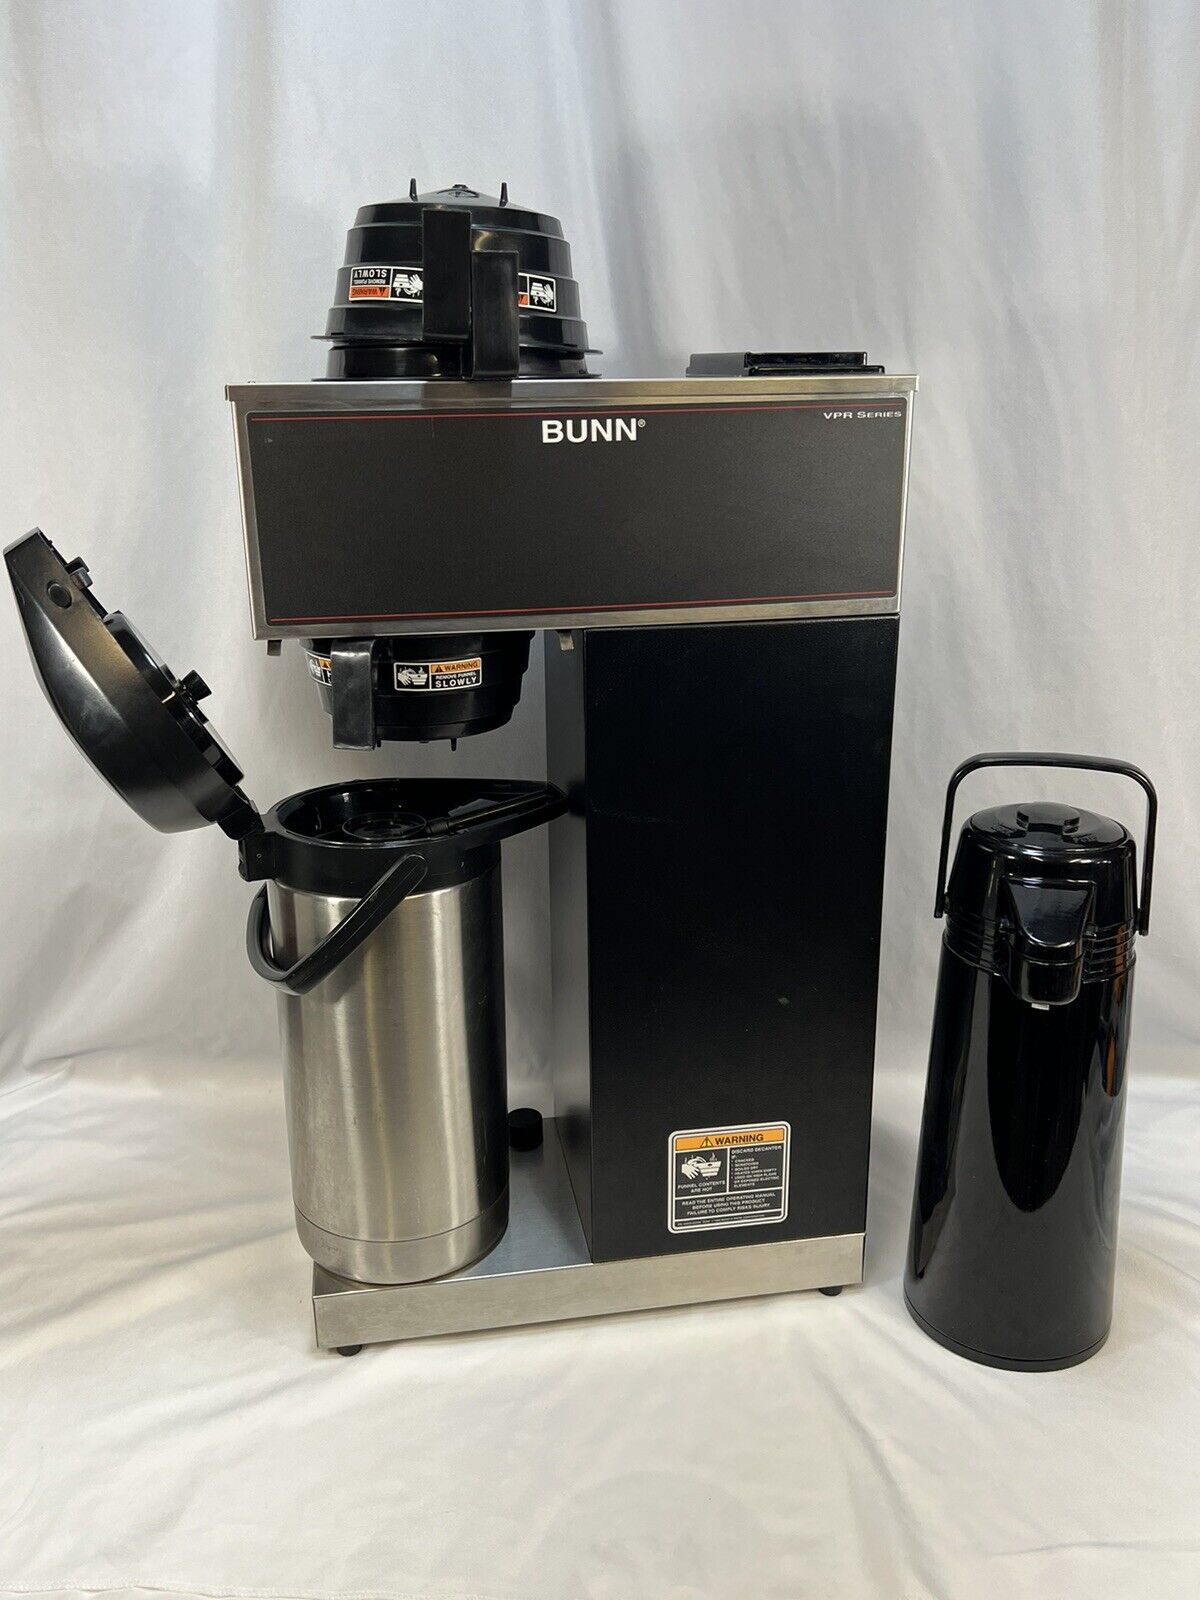 Bunn VPR w/APS Pourover Airpot Coffee Brewer 33200.0012 Good Working Condition